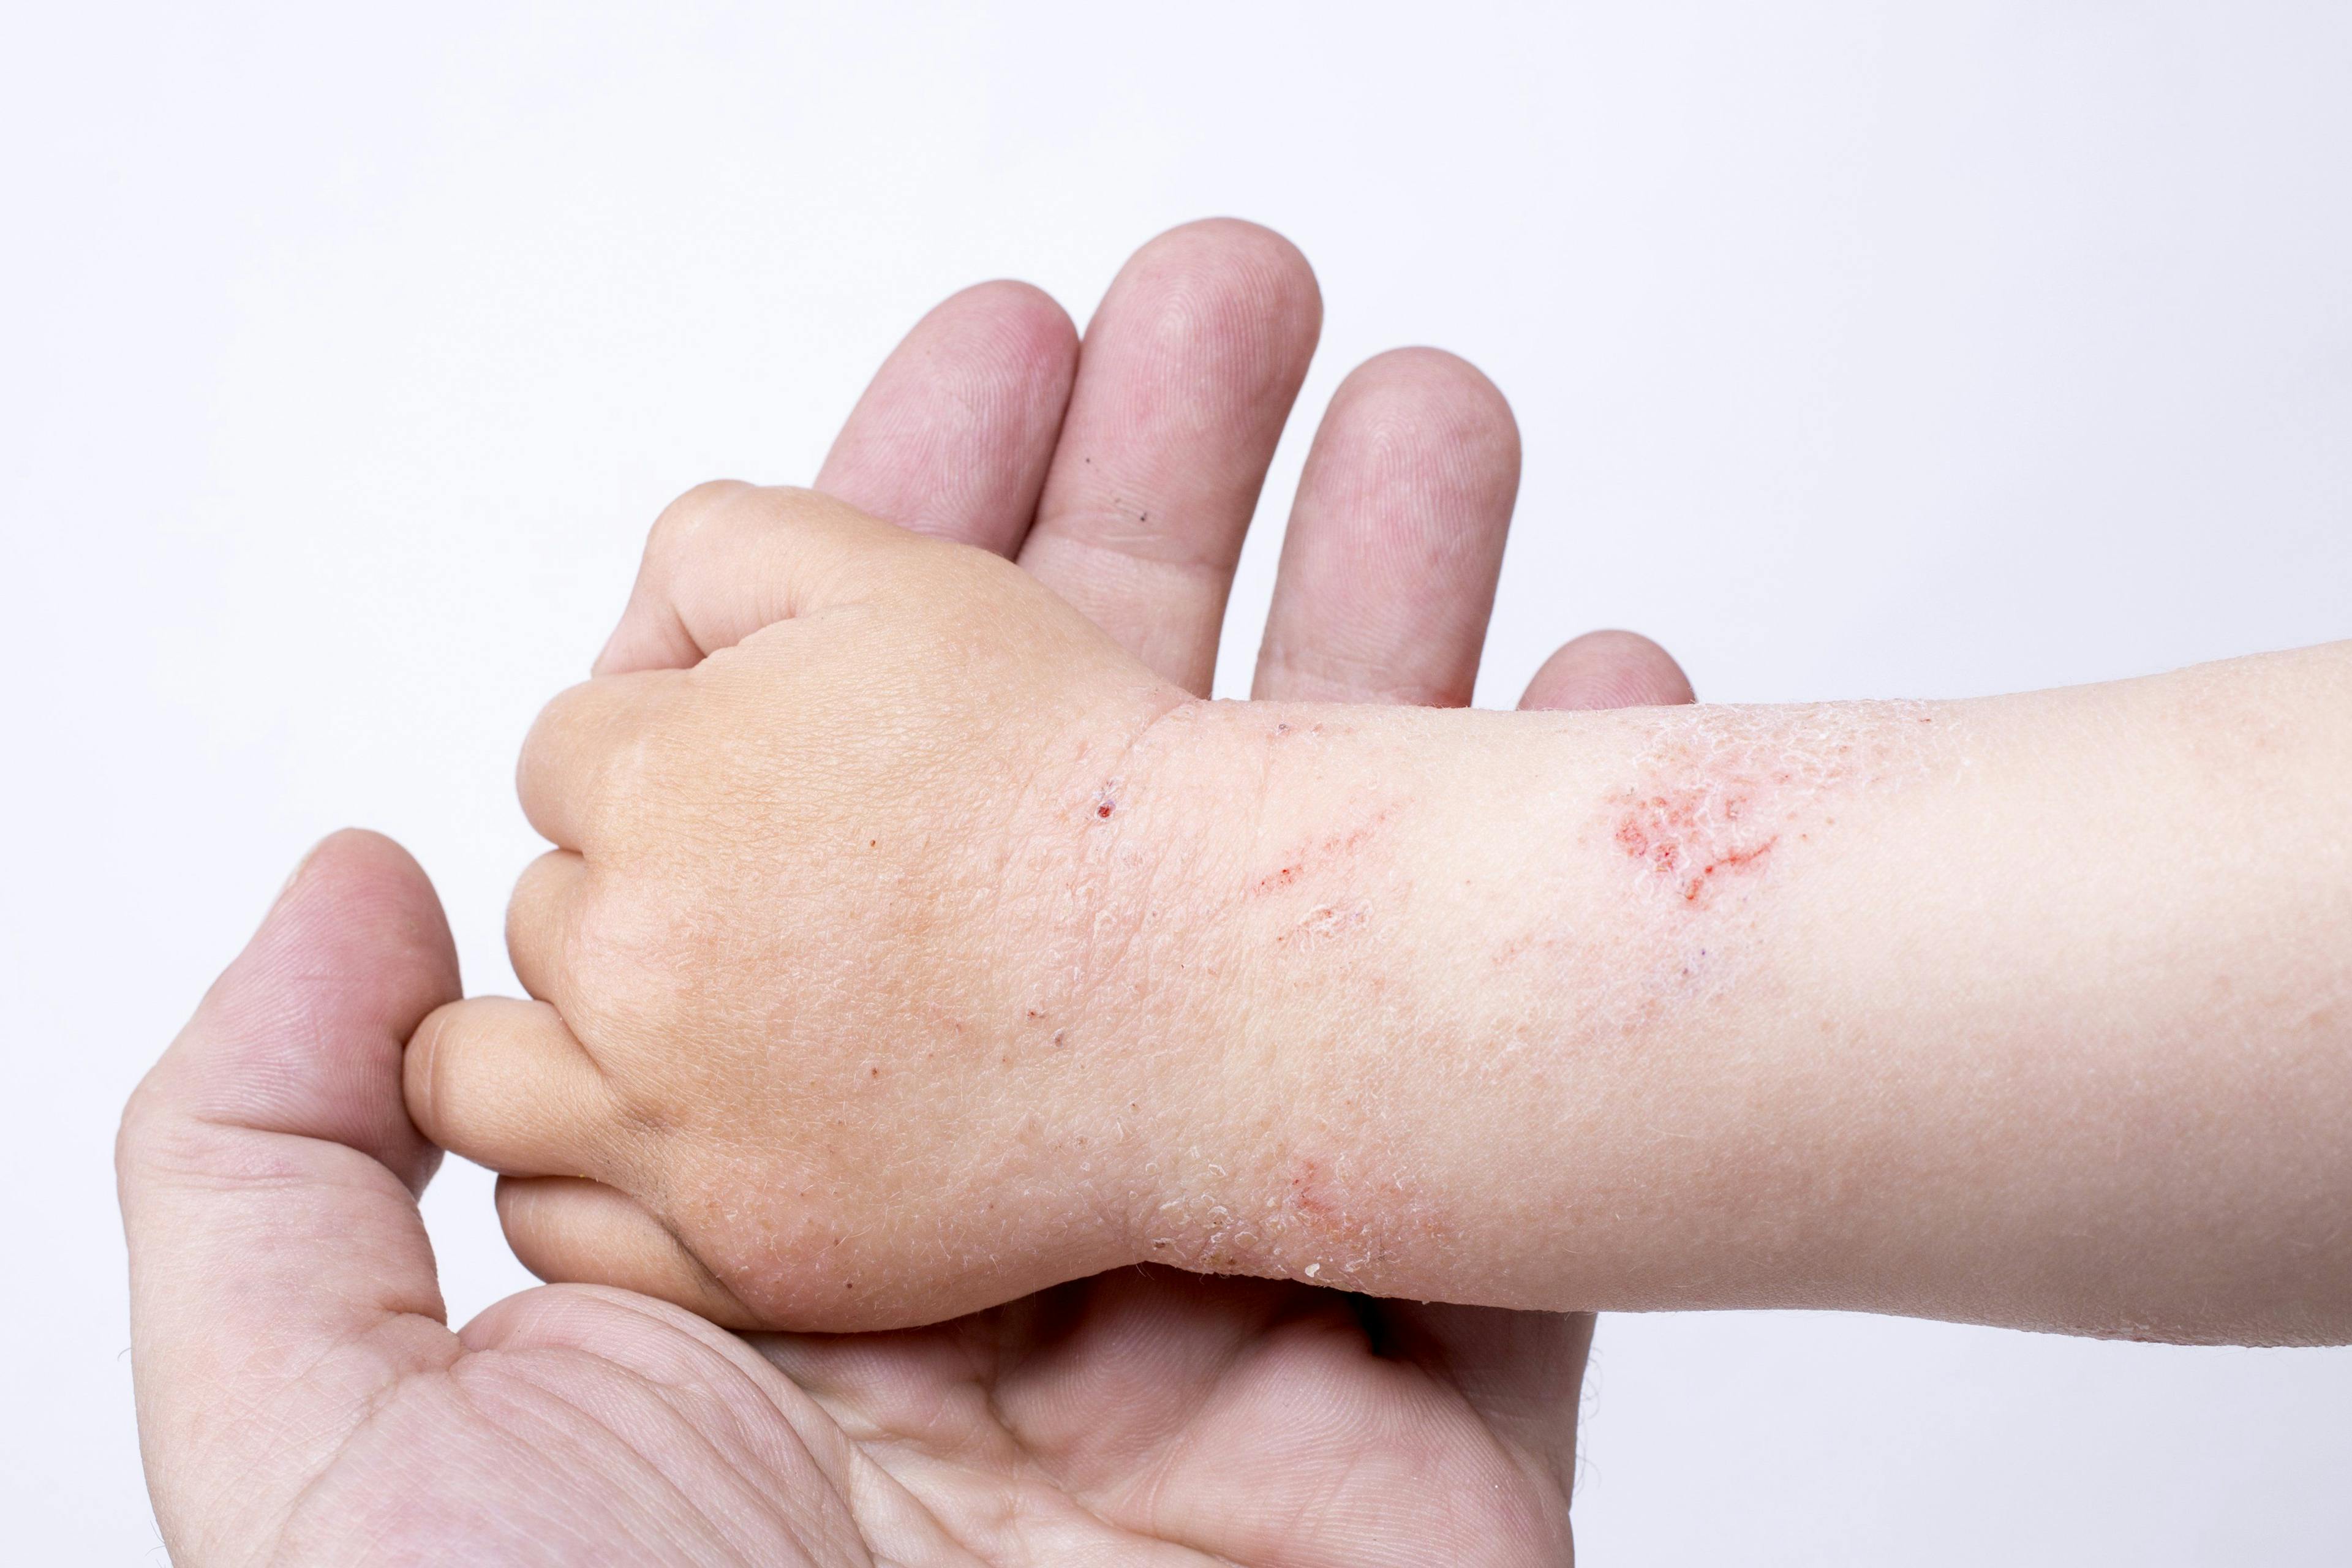 Person holding child's hand which shows red, irritated skin